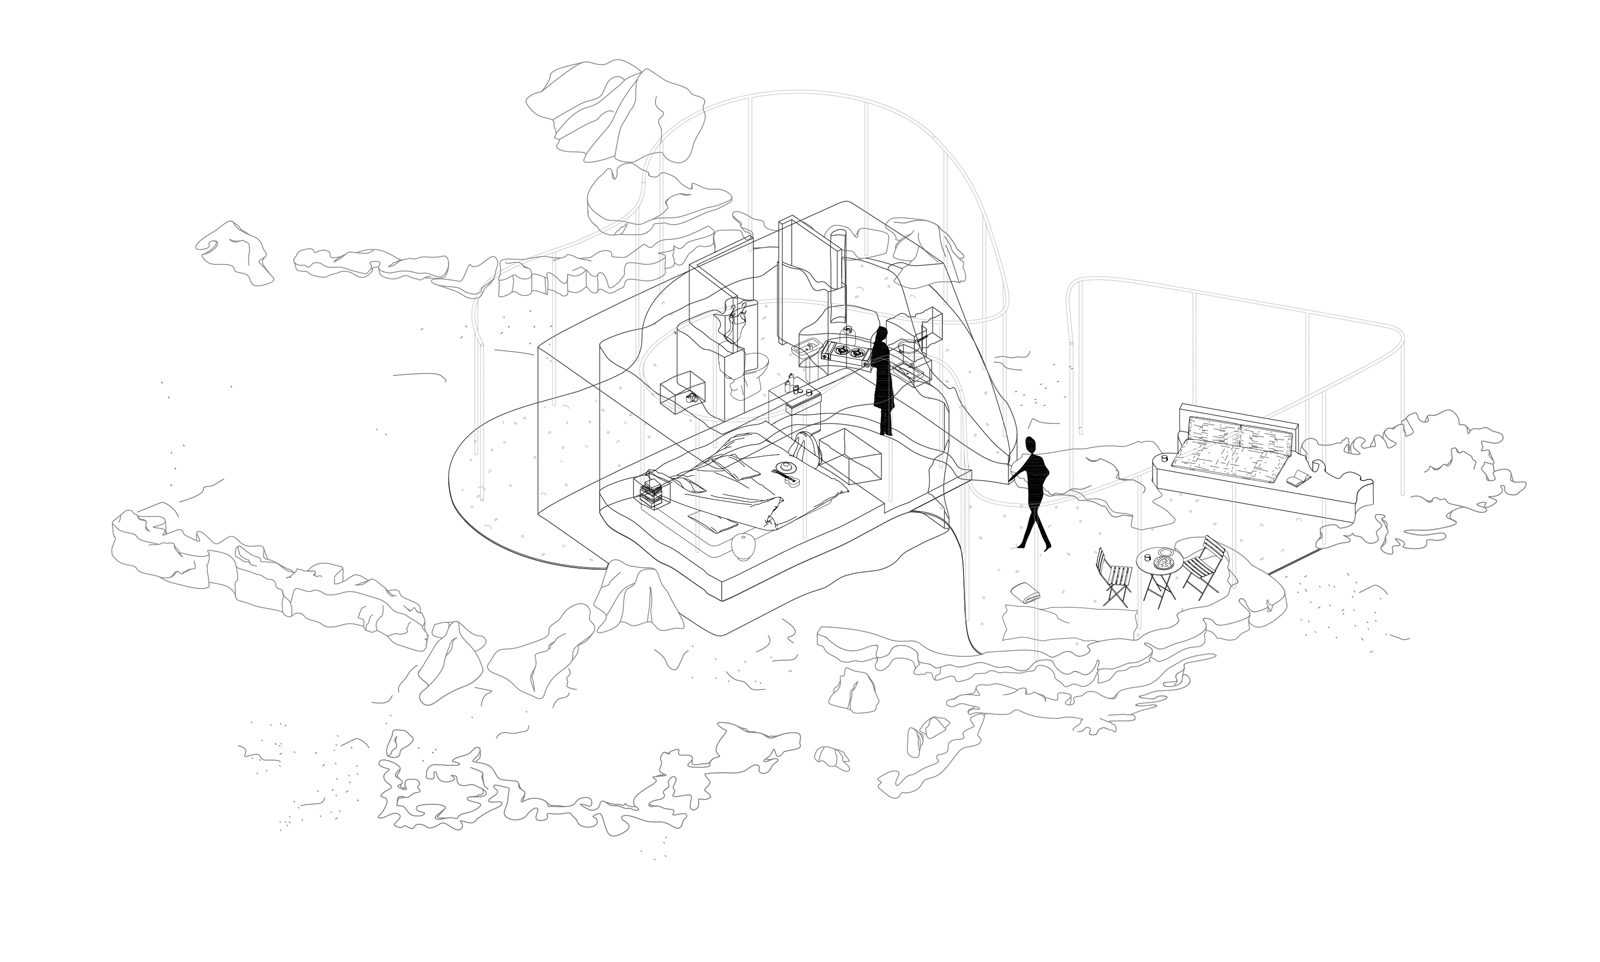 Archisearch Dwelling in Boundaries: Vacation in the ruins of Serifos | Diploma thesis by Maria Magdalini Meimaridou & Charalampos Xypnitos